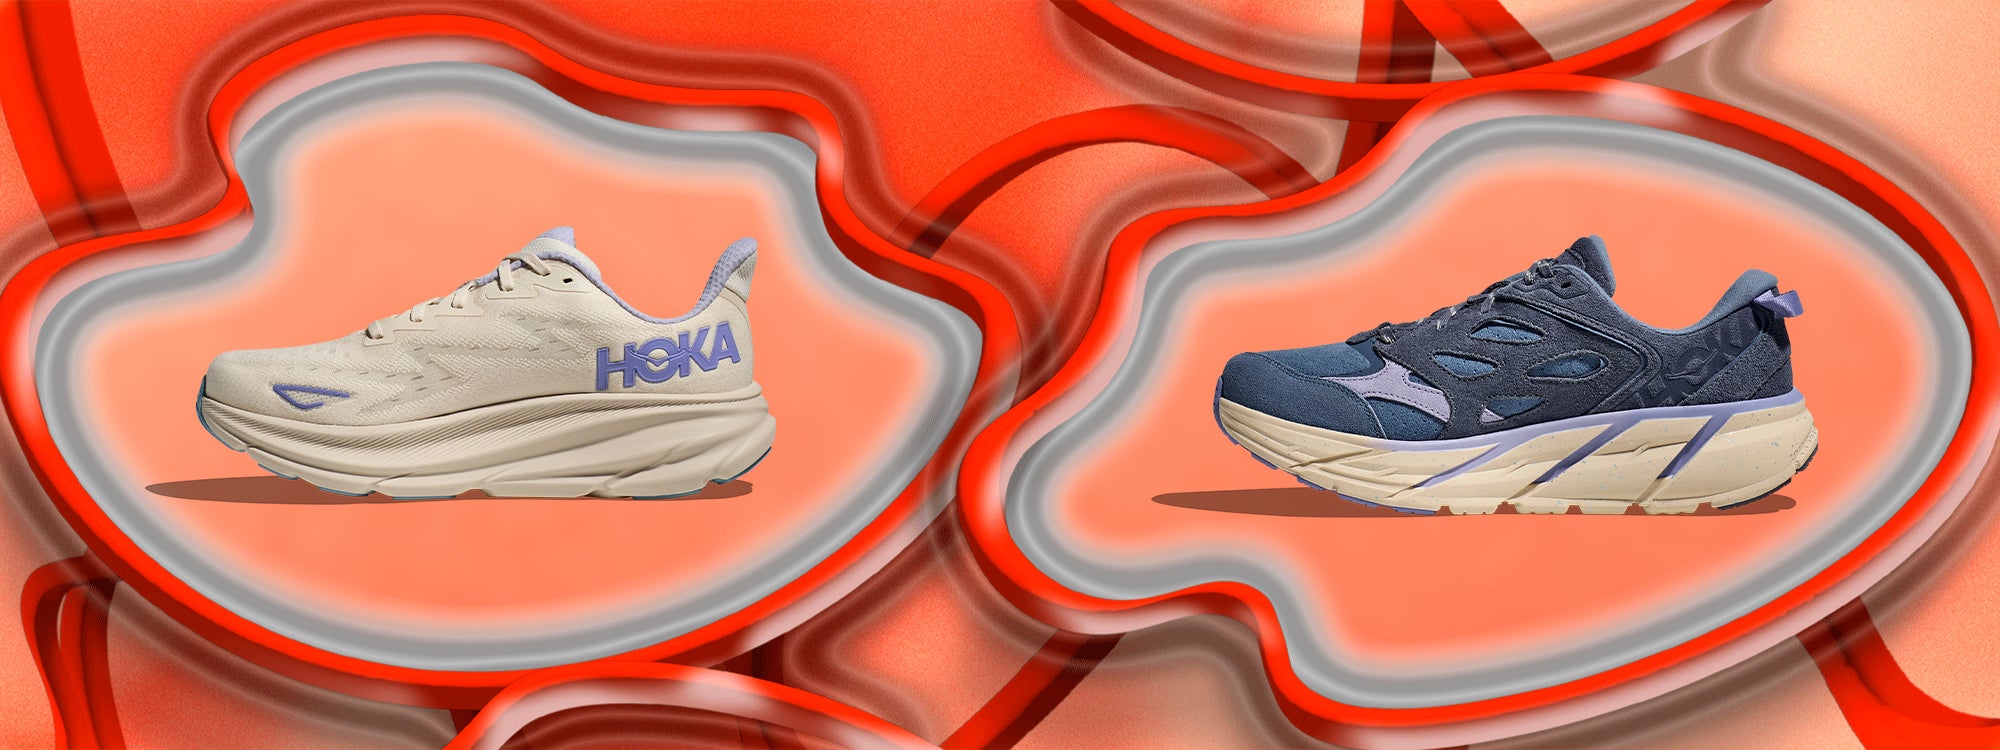 Hoka x FP Movement Collab Features Fashion&Forward Sneakers For Spring